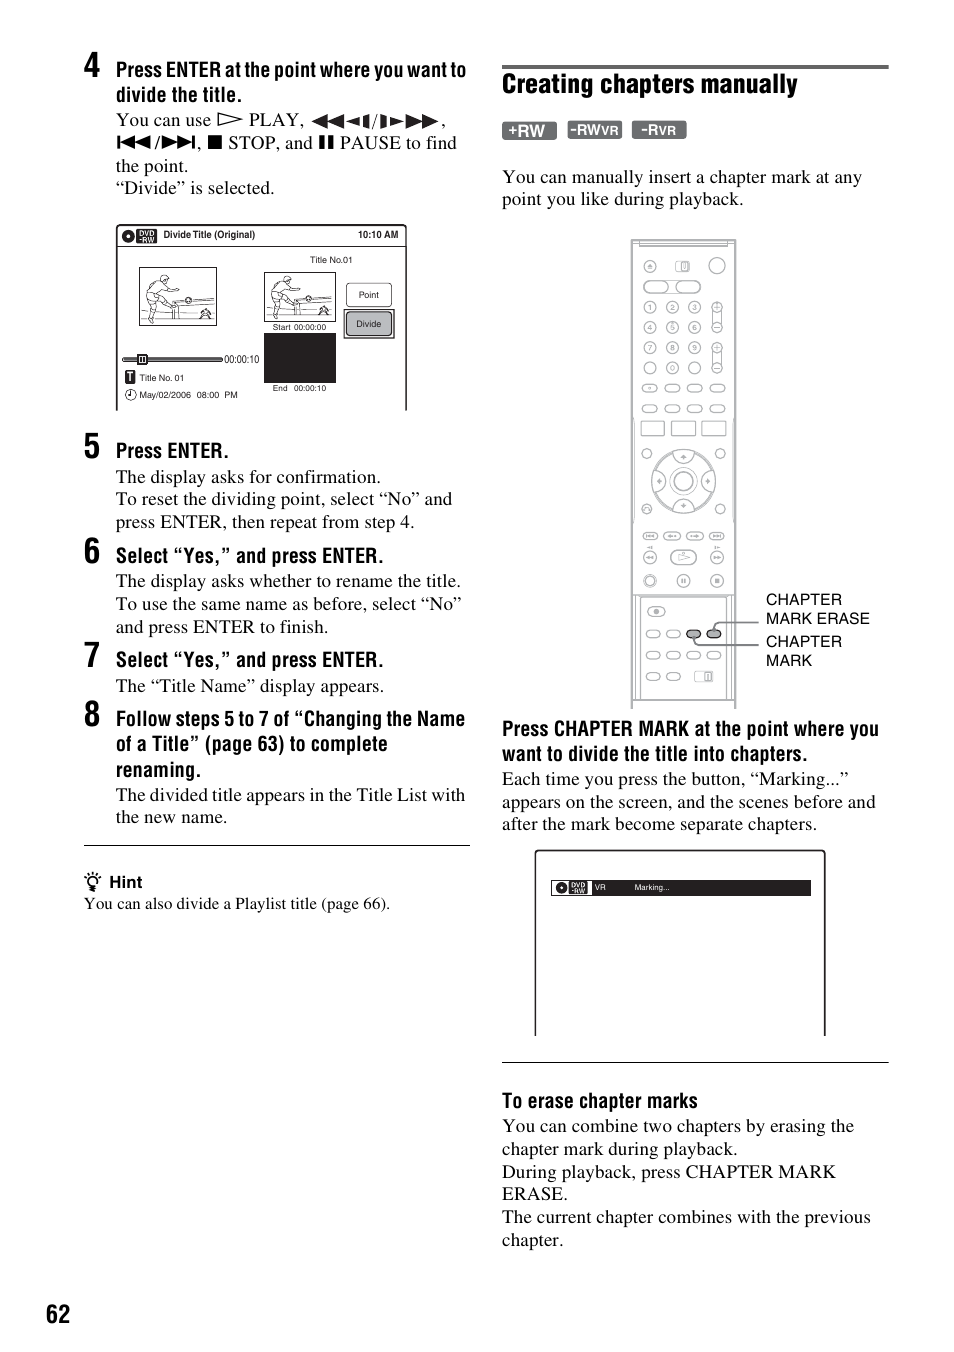 Creating chapters manually | Sony RDR-VX521 User Manual | Page 62 / 132